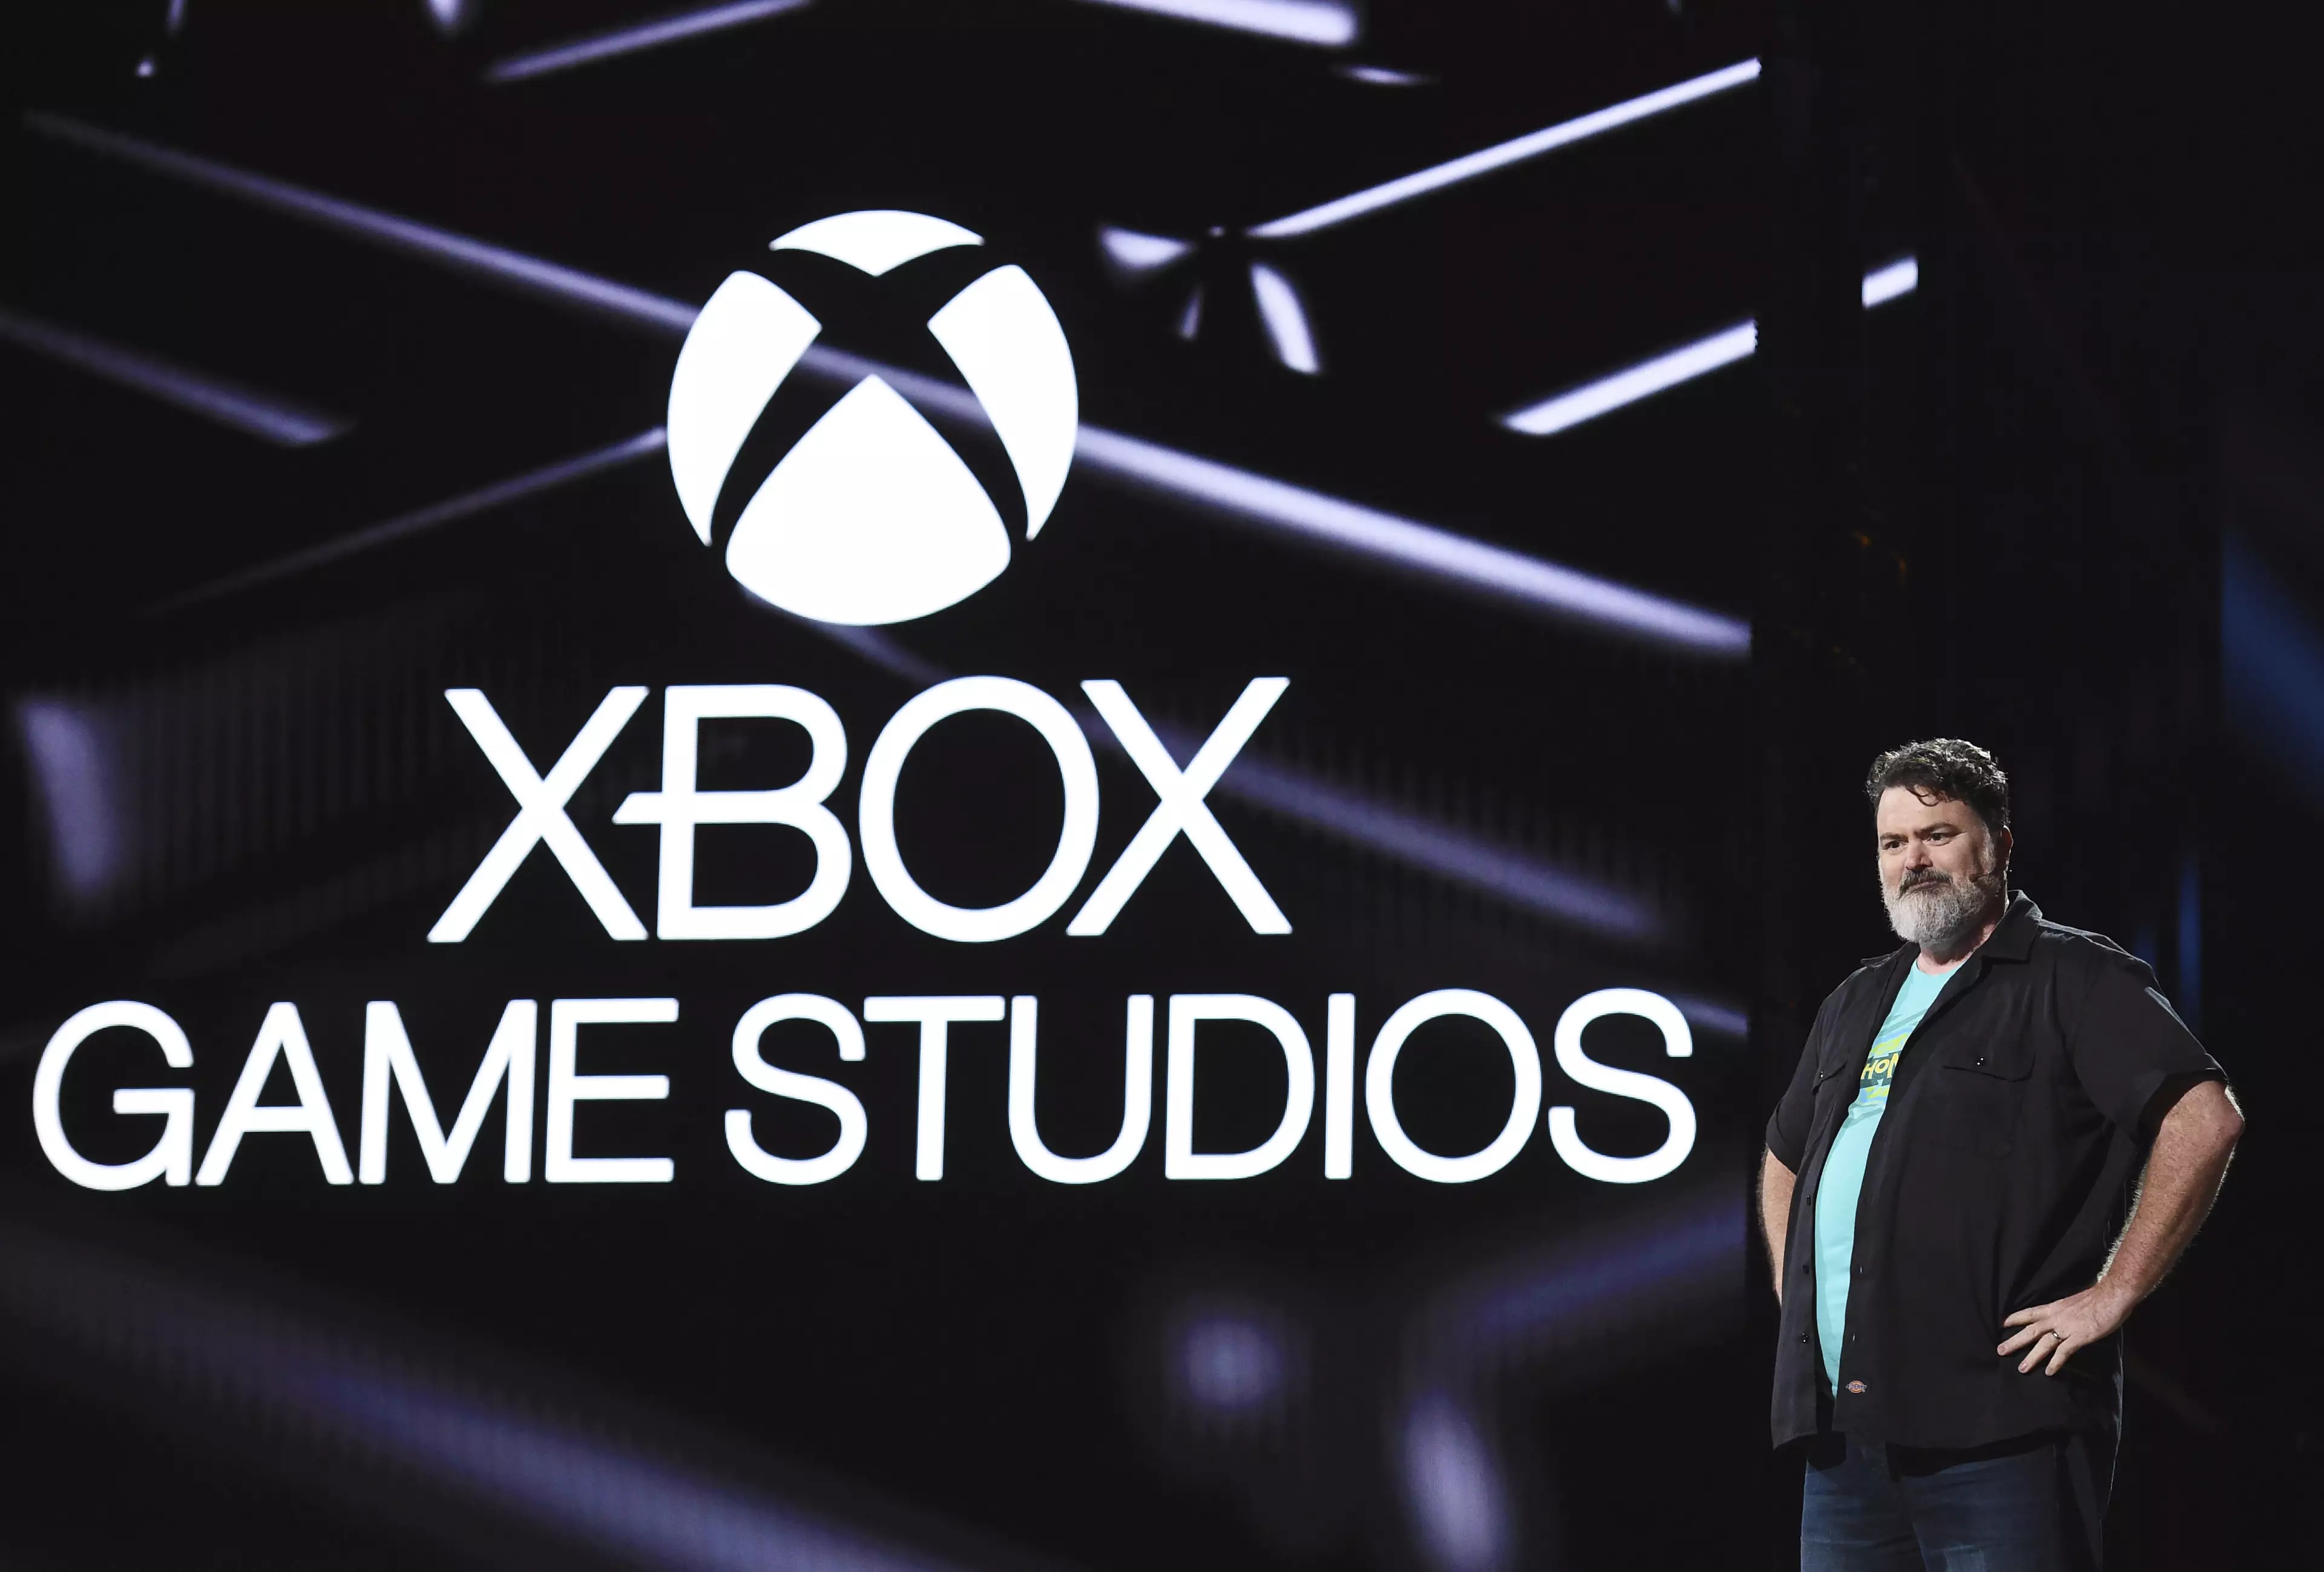 The next Xbox console will be released before the end of 2020.